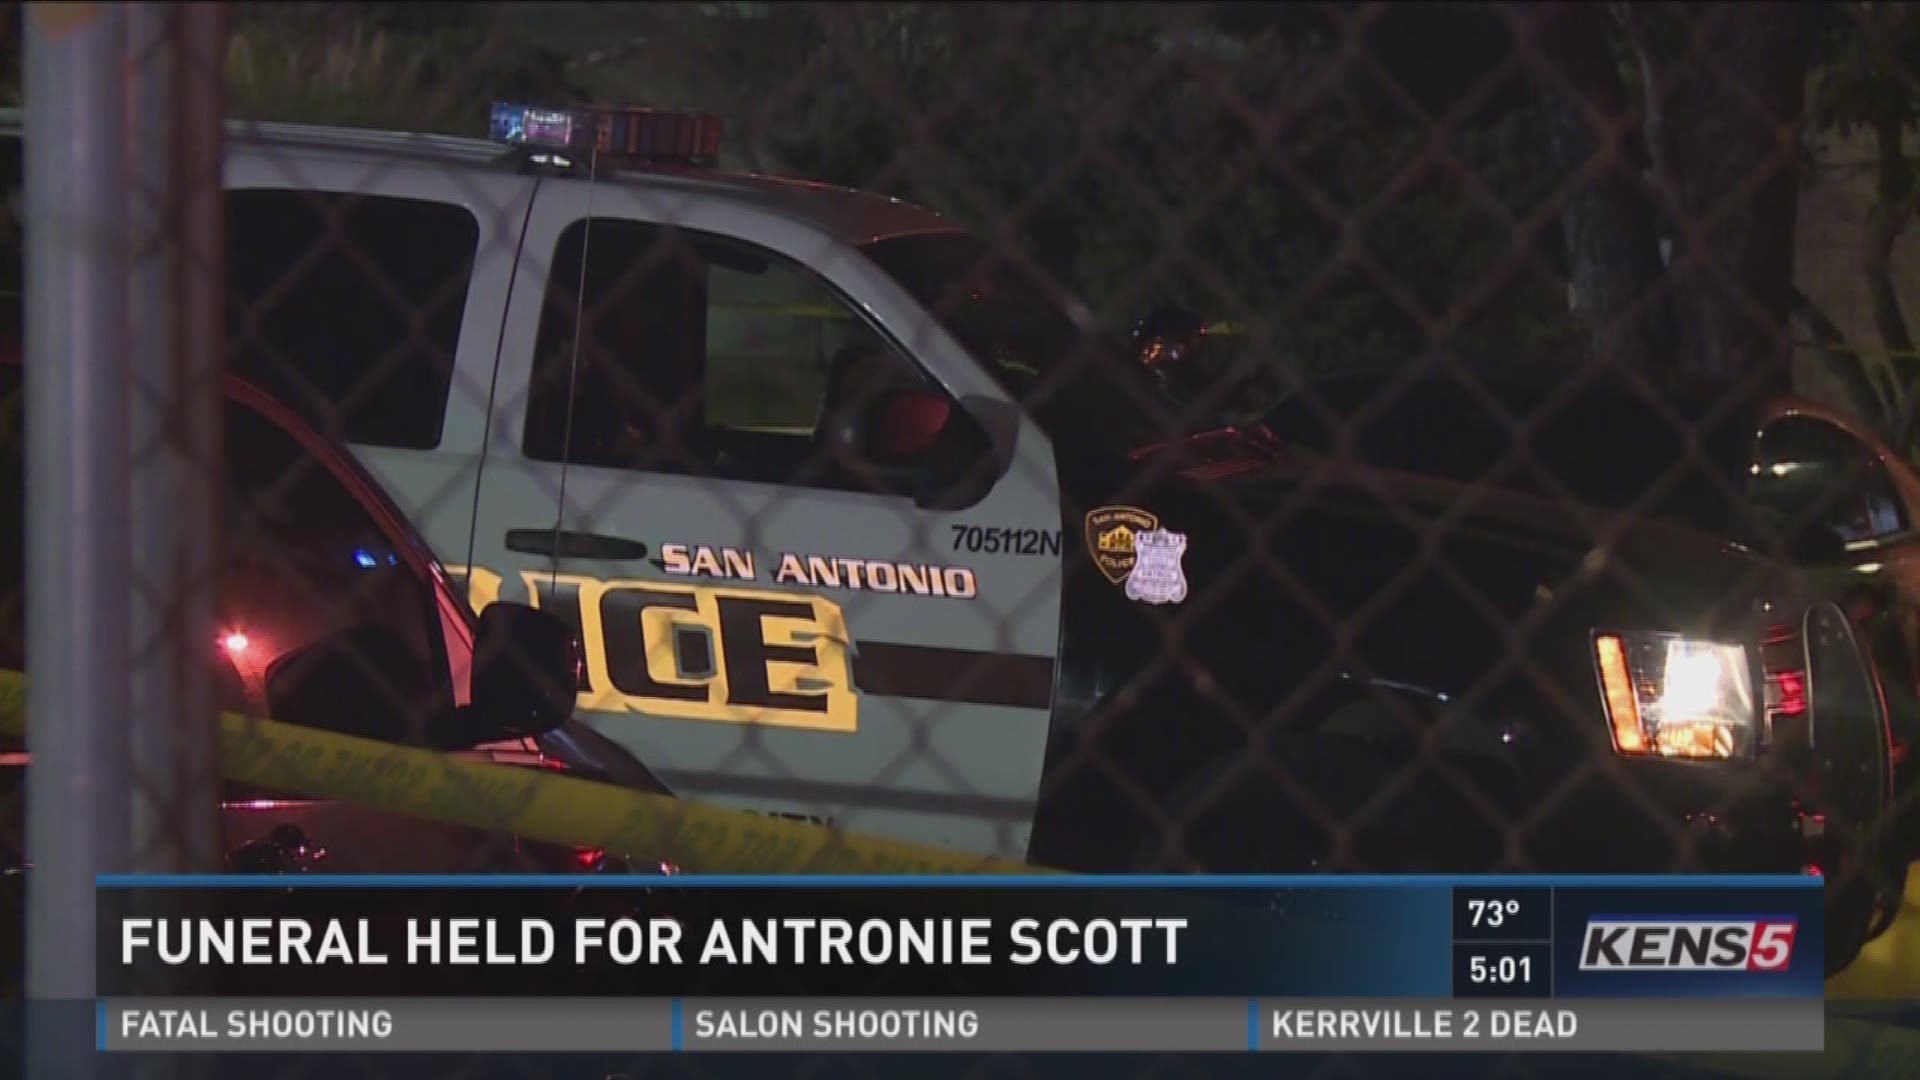 Funeral held for Antronie Scott